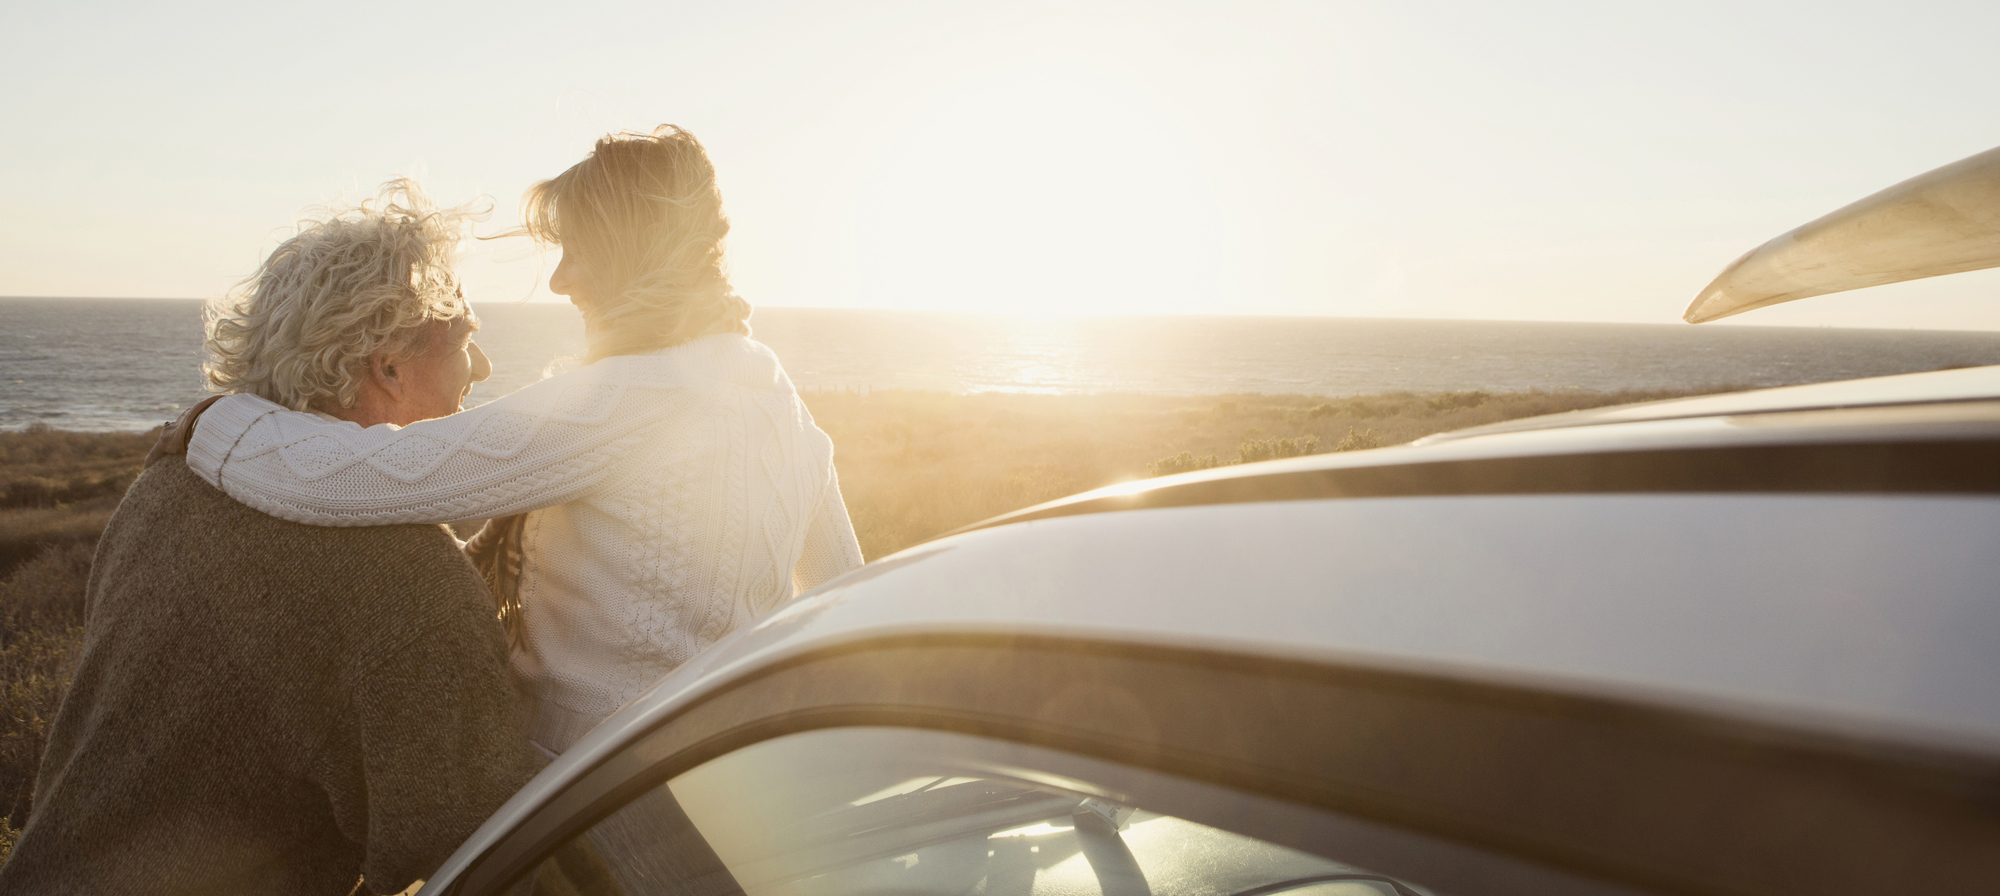 7 Questions to Ask Yourself to Stay Safe and Healthy on a Road Trip